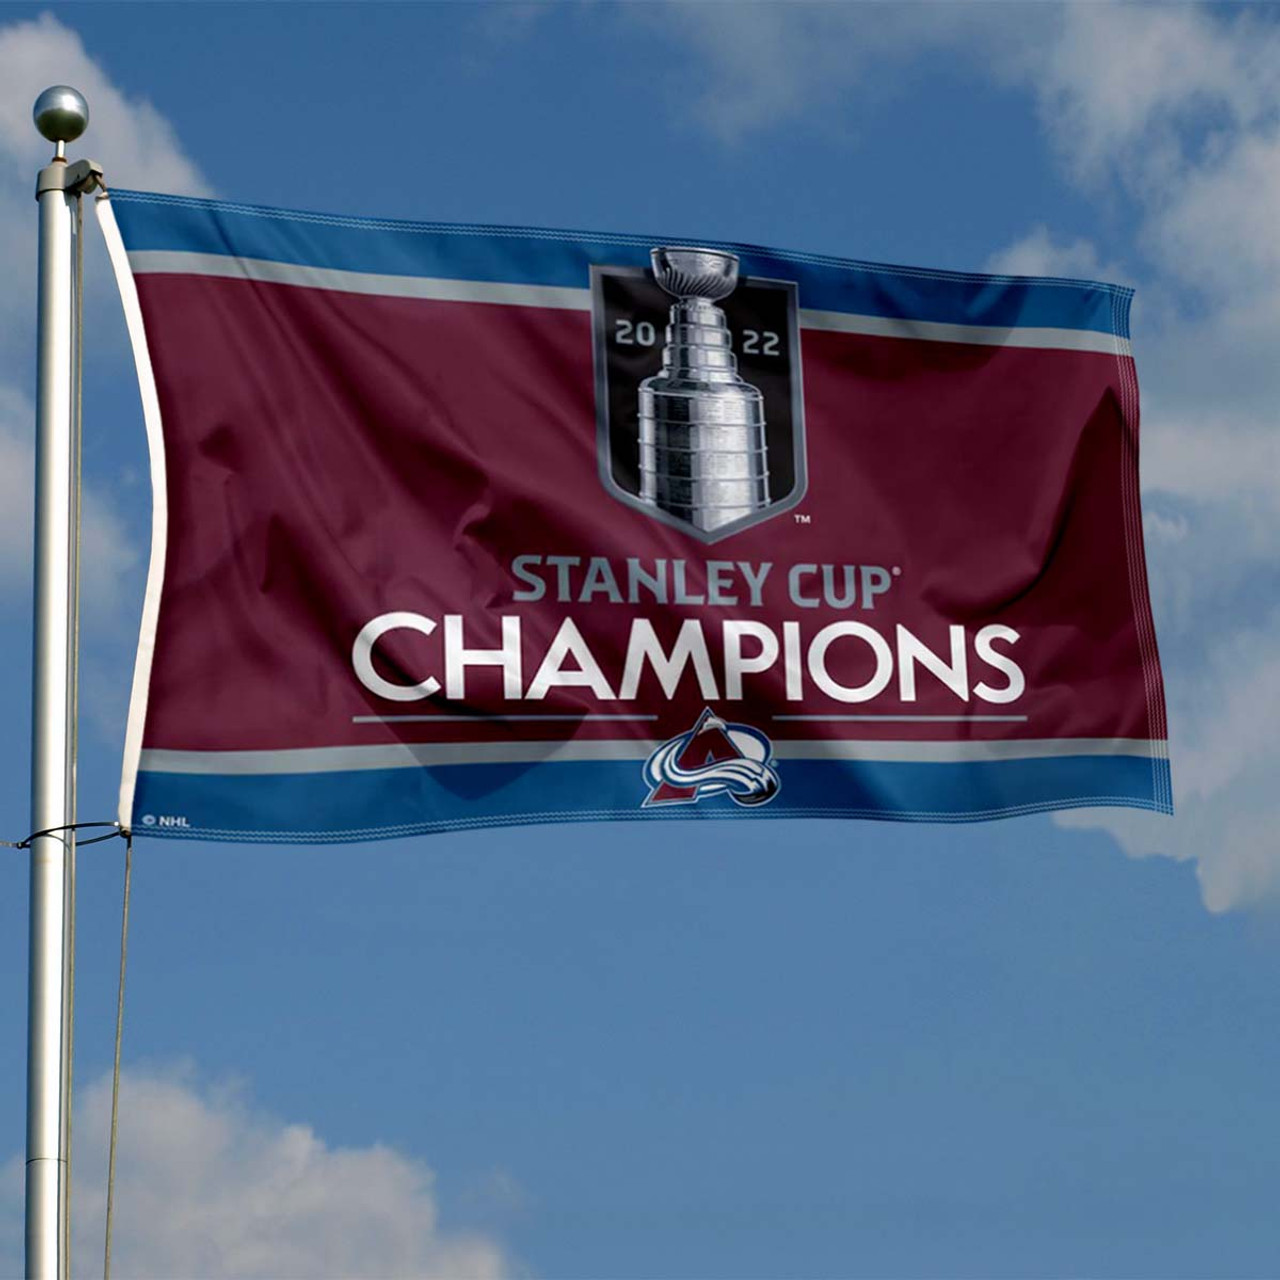  Colorado Avalanche 2022 Stanley Cup Champions Pennant